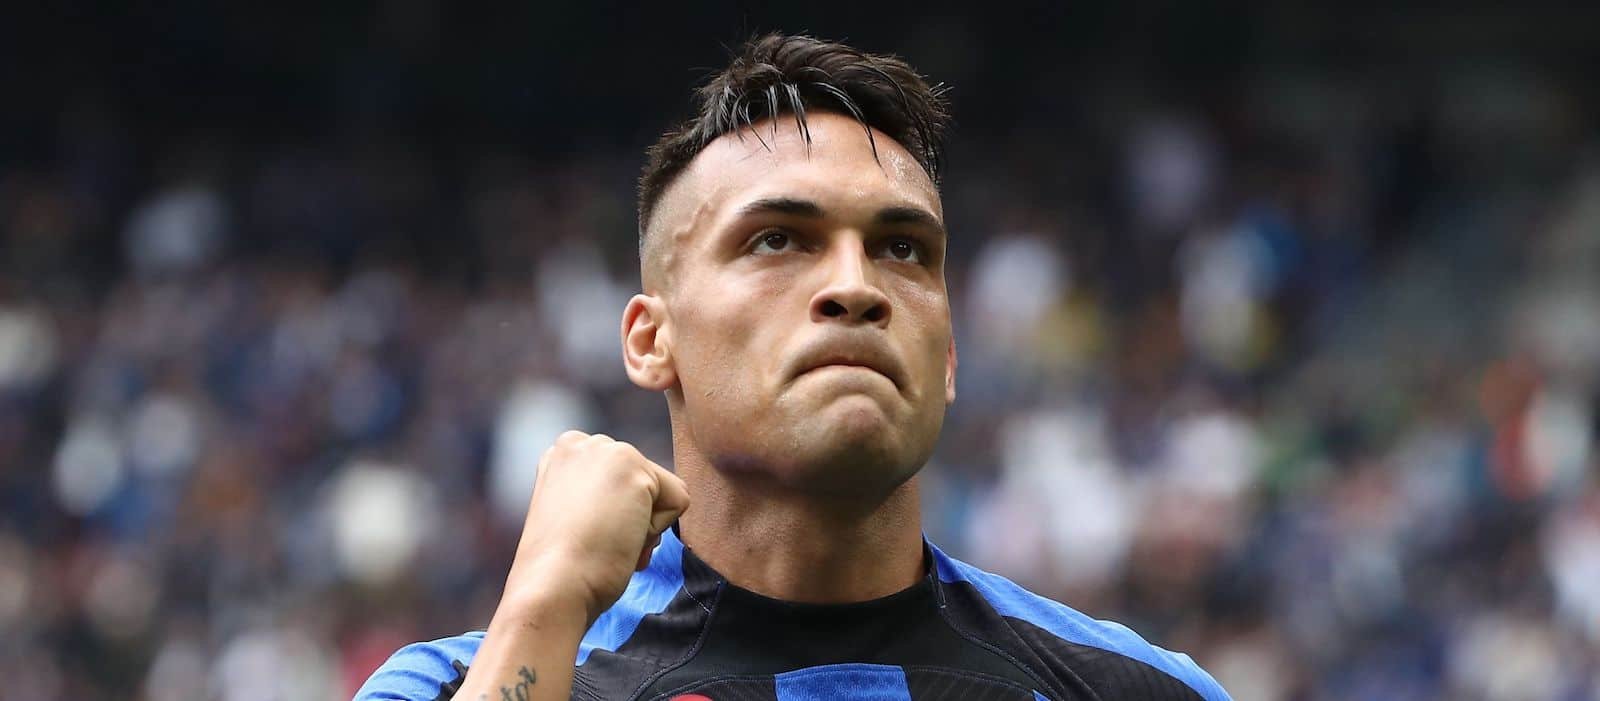 Lautaro Martinez is Erik ten Hag’s “personal request” to improve Man United’s strikeforce – Man United News And Transfer News